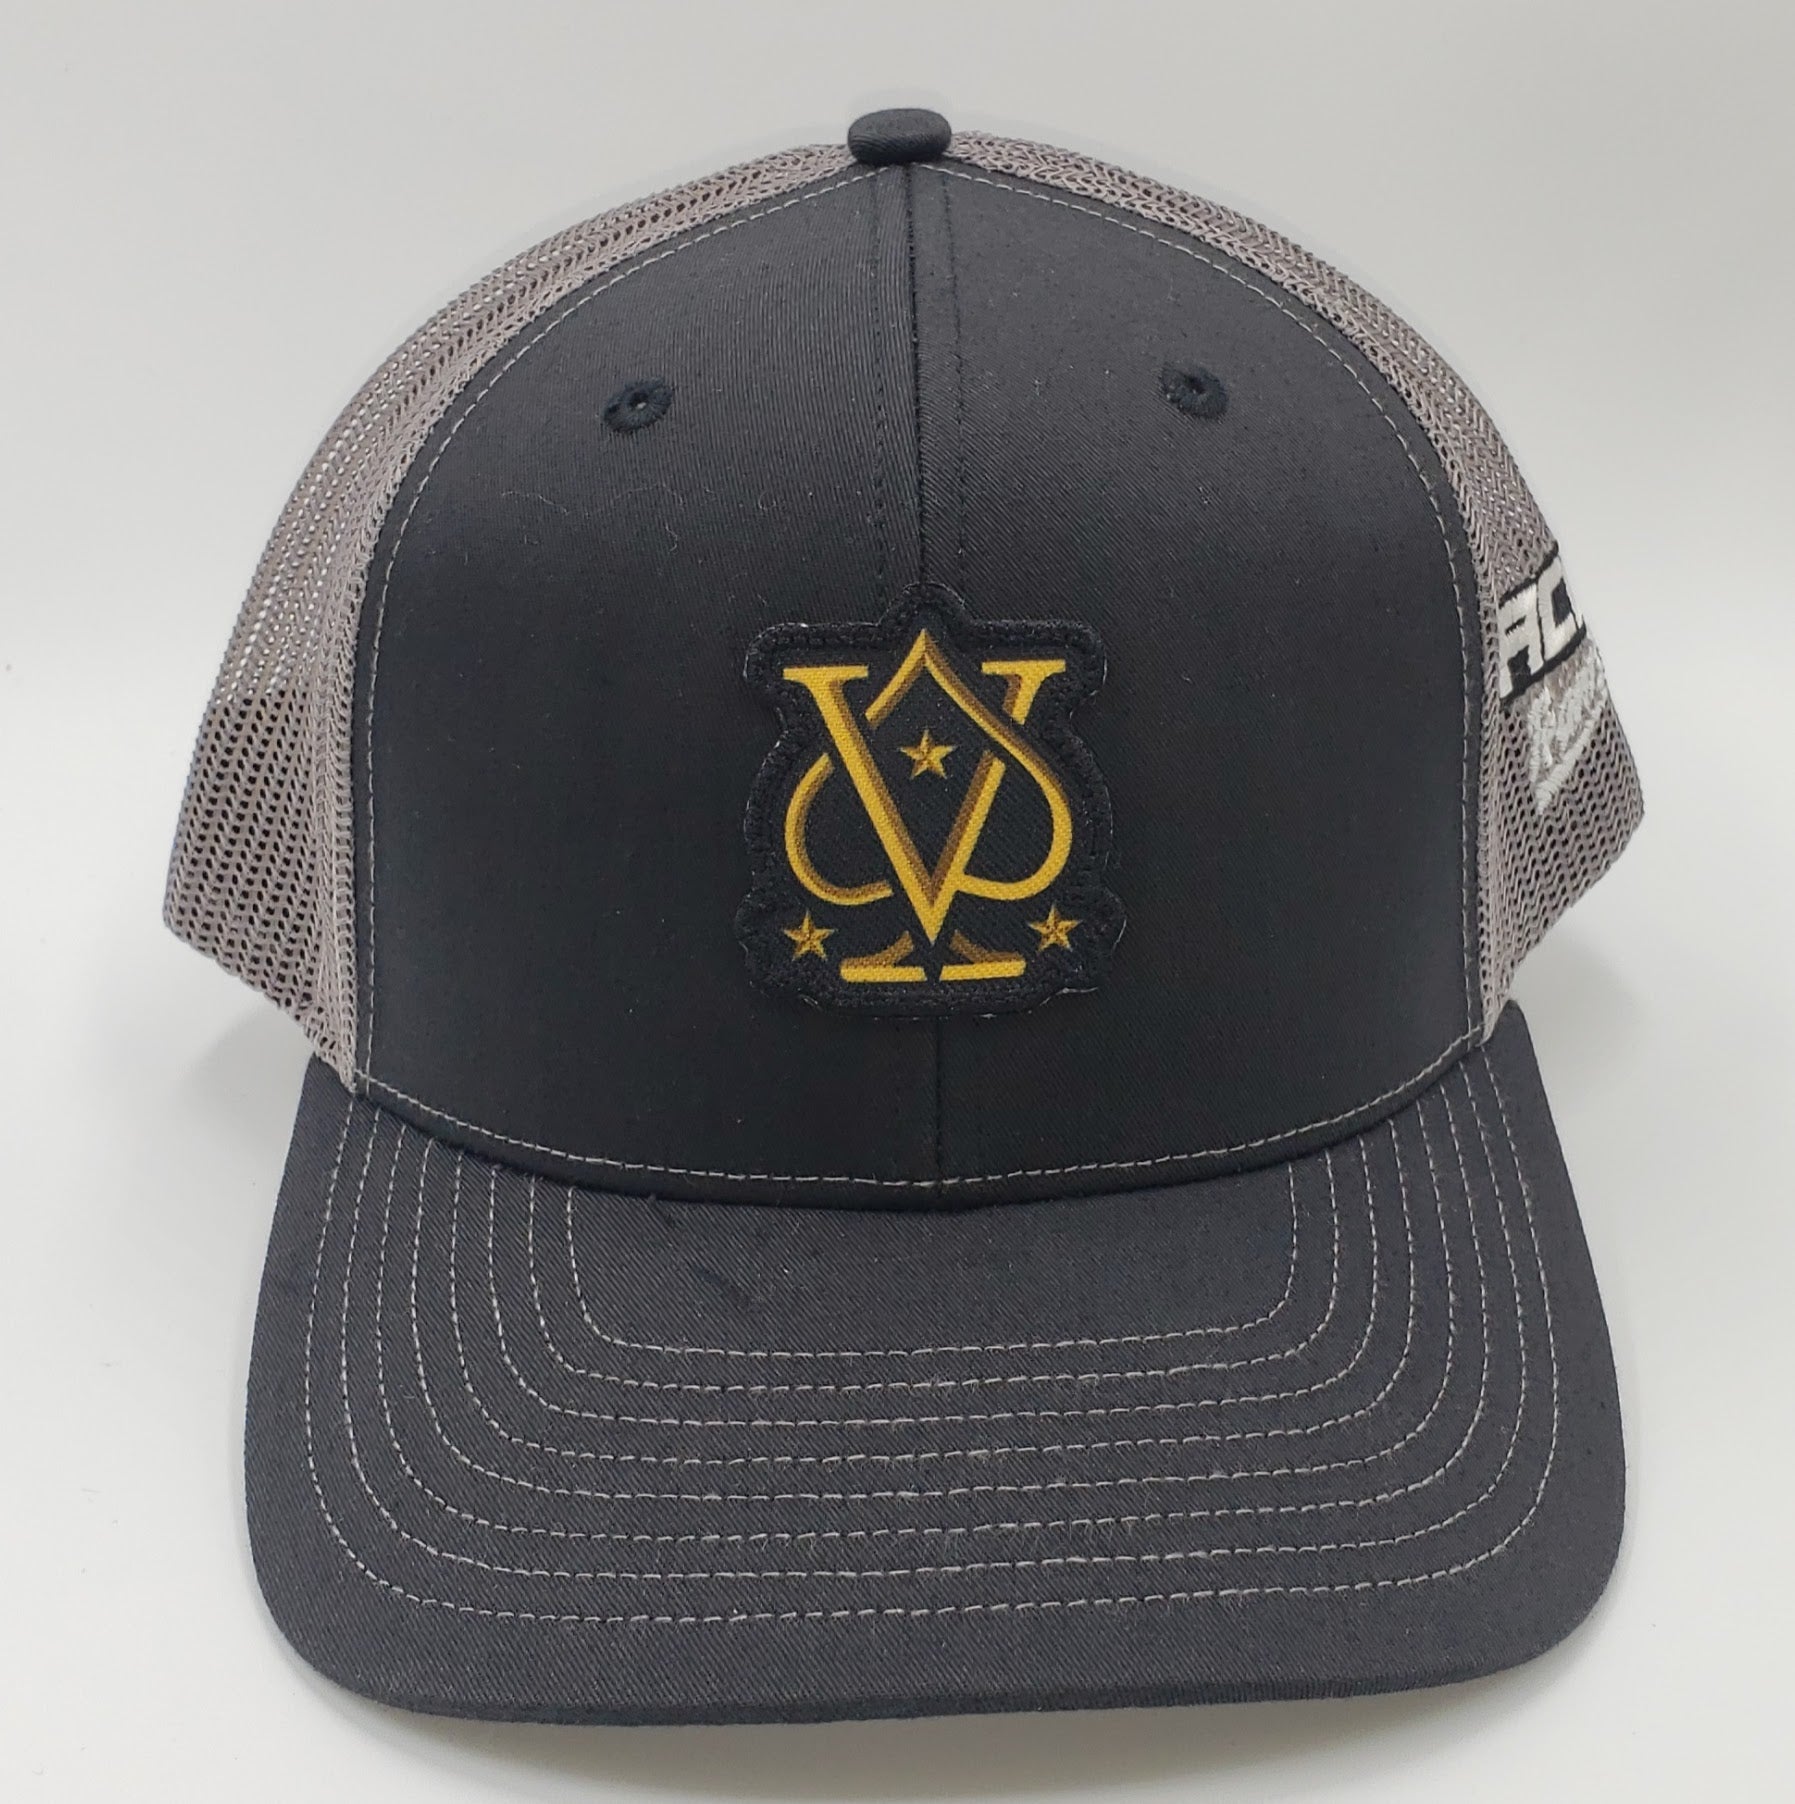 ACL Teams Hats - Vegas High Rollers